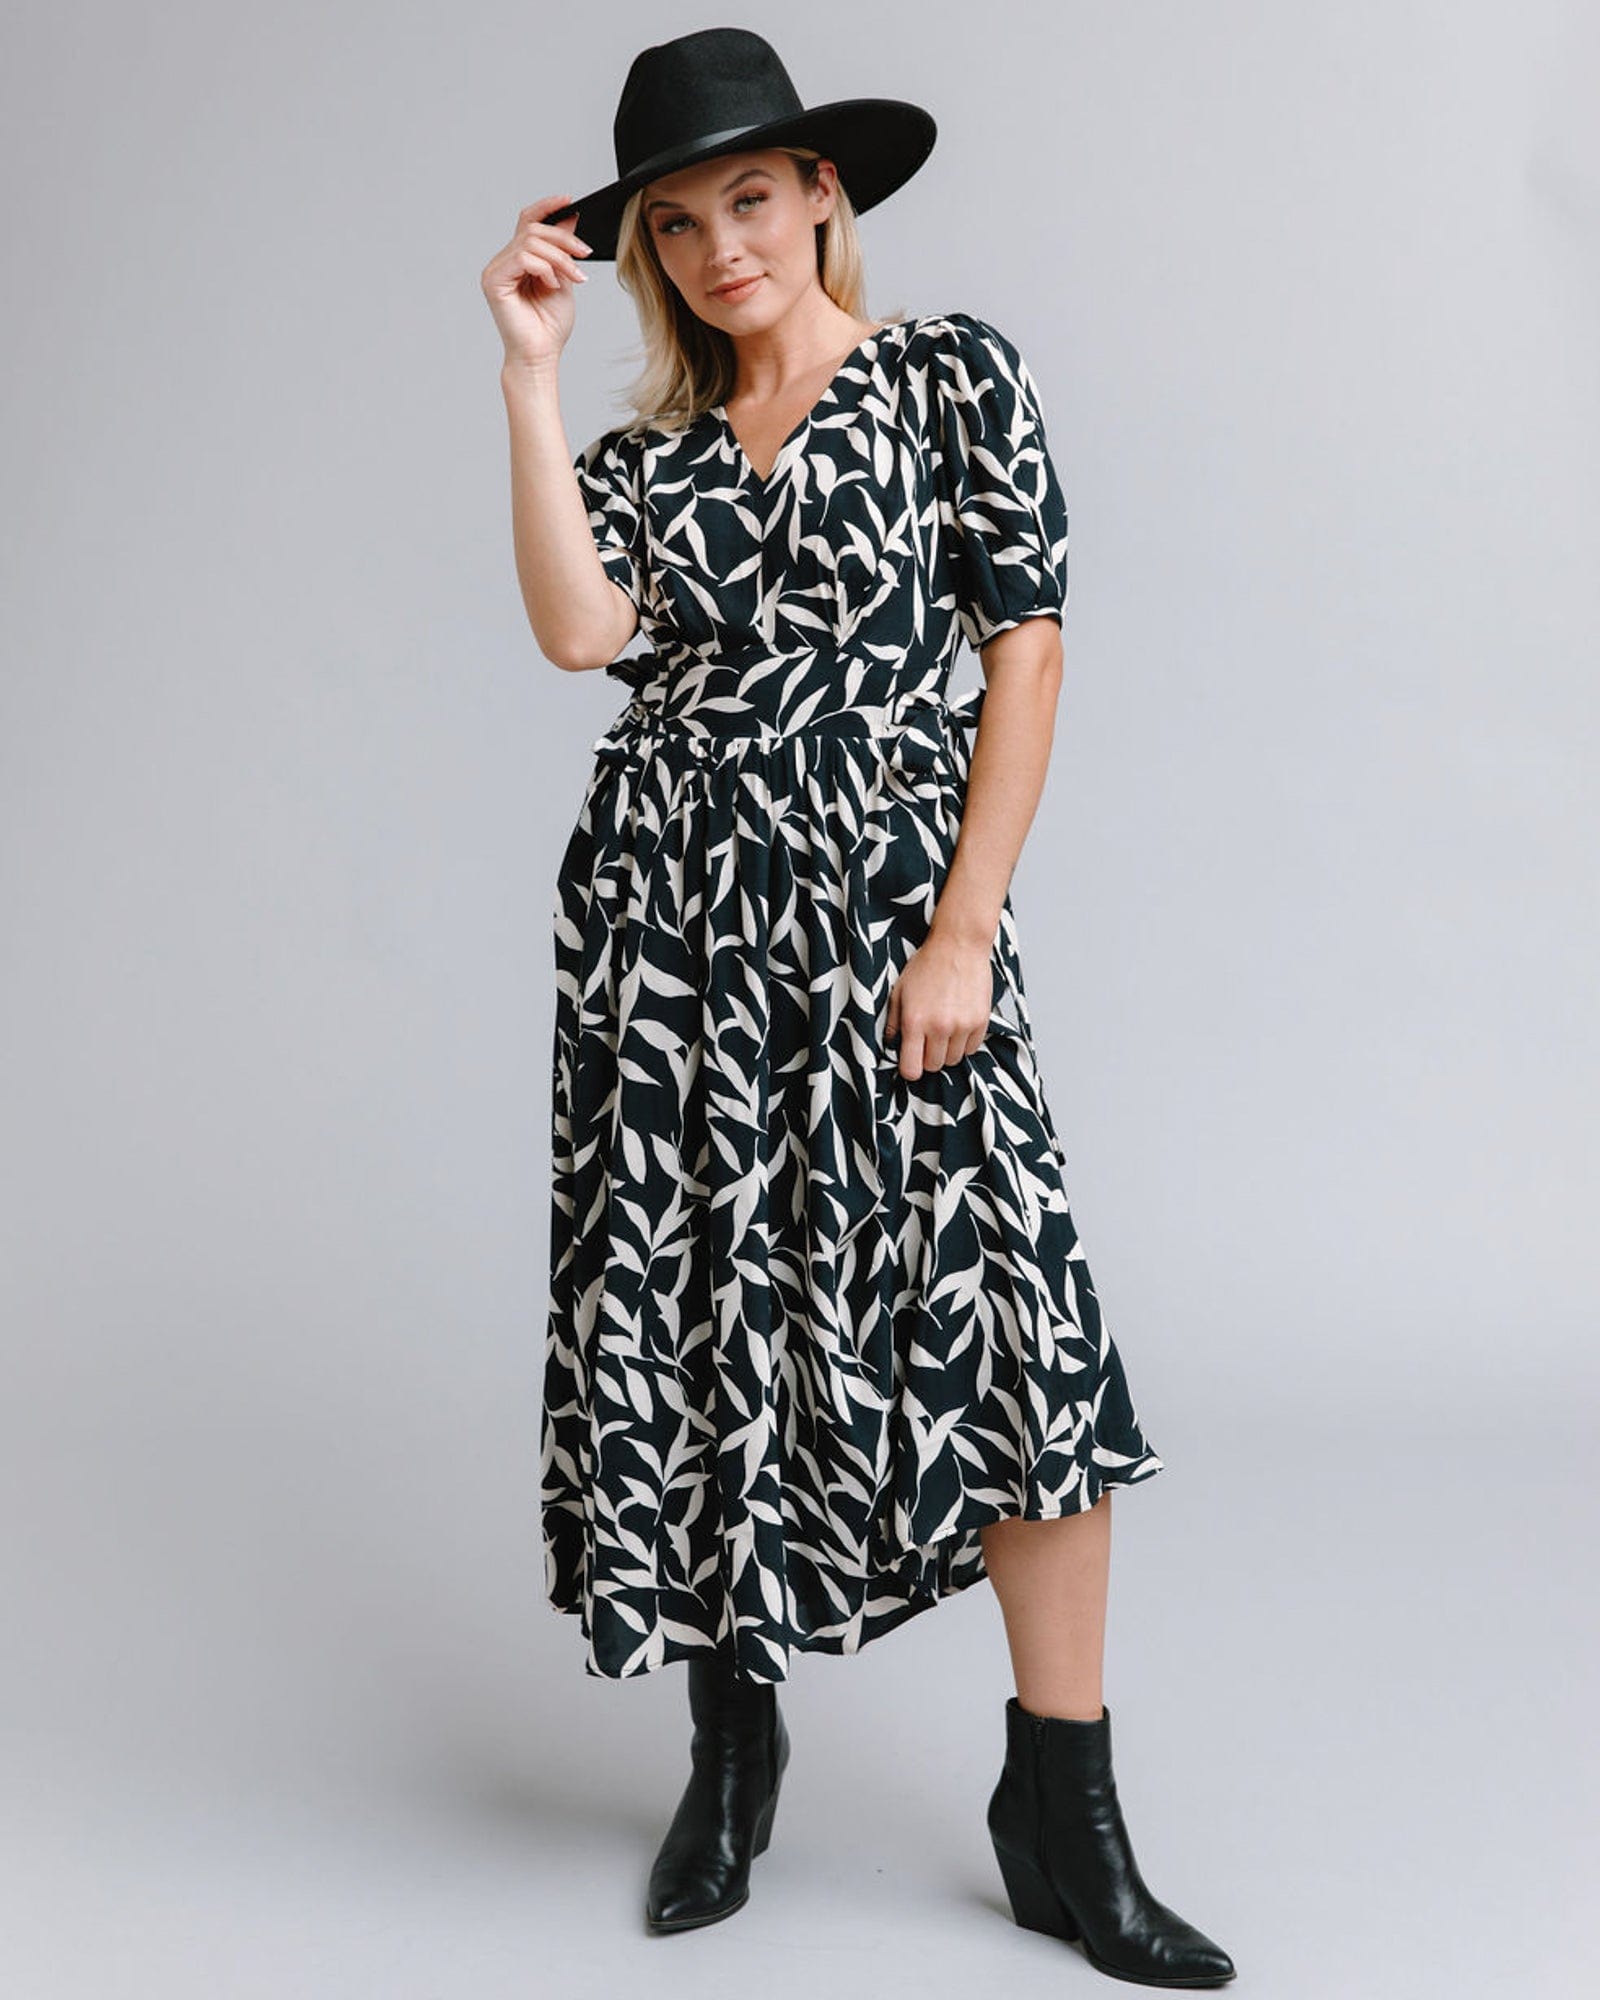 Woman in a short sleeve, midi-length, black and white print dress